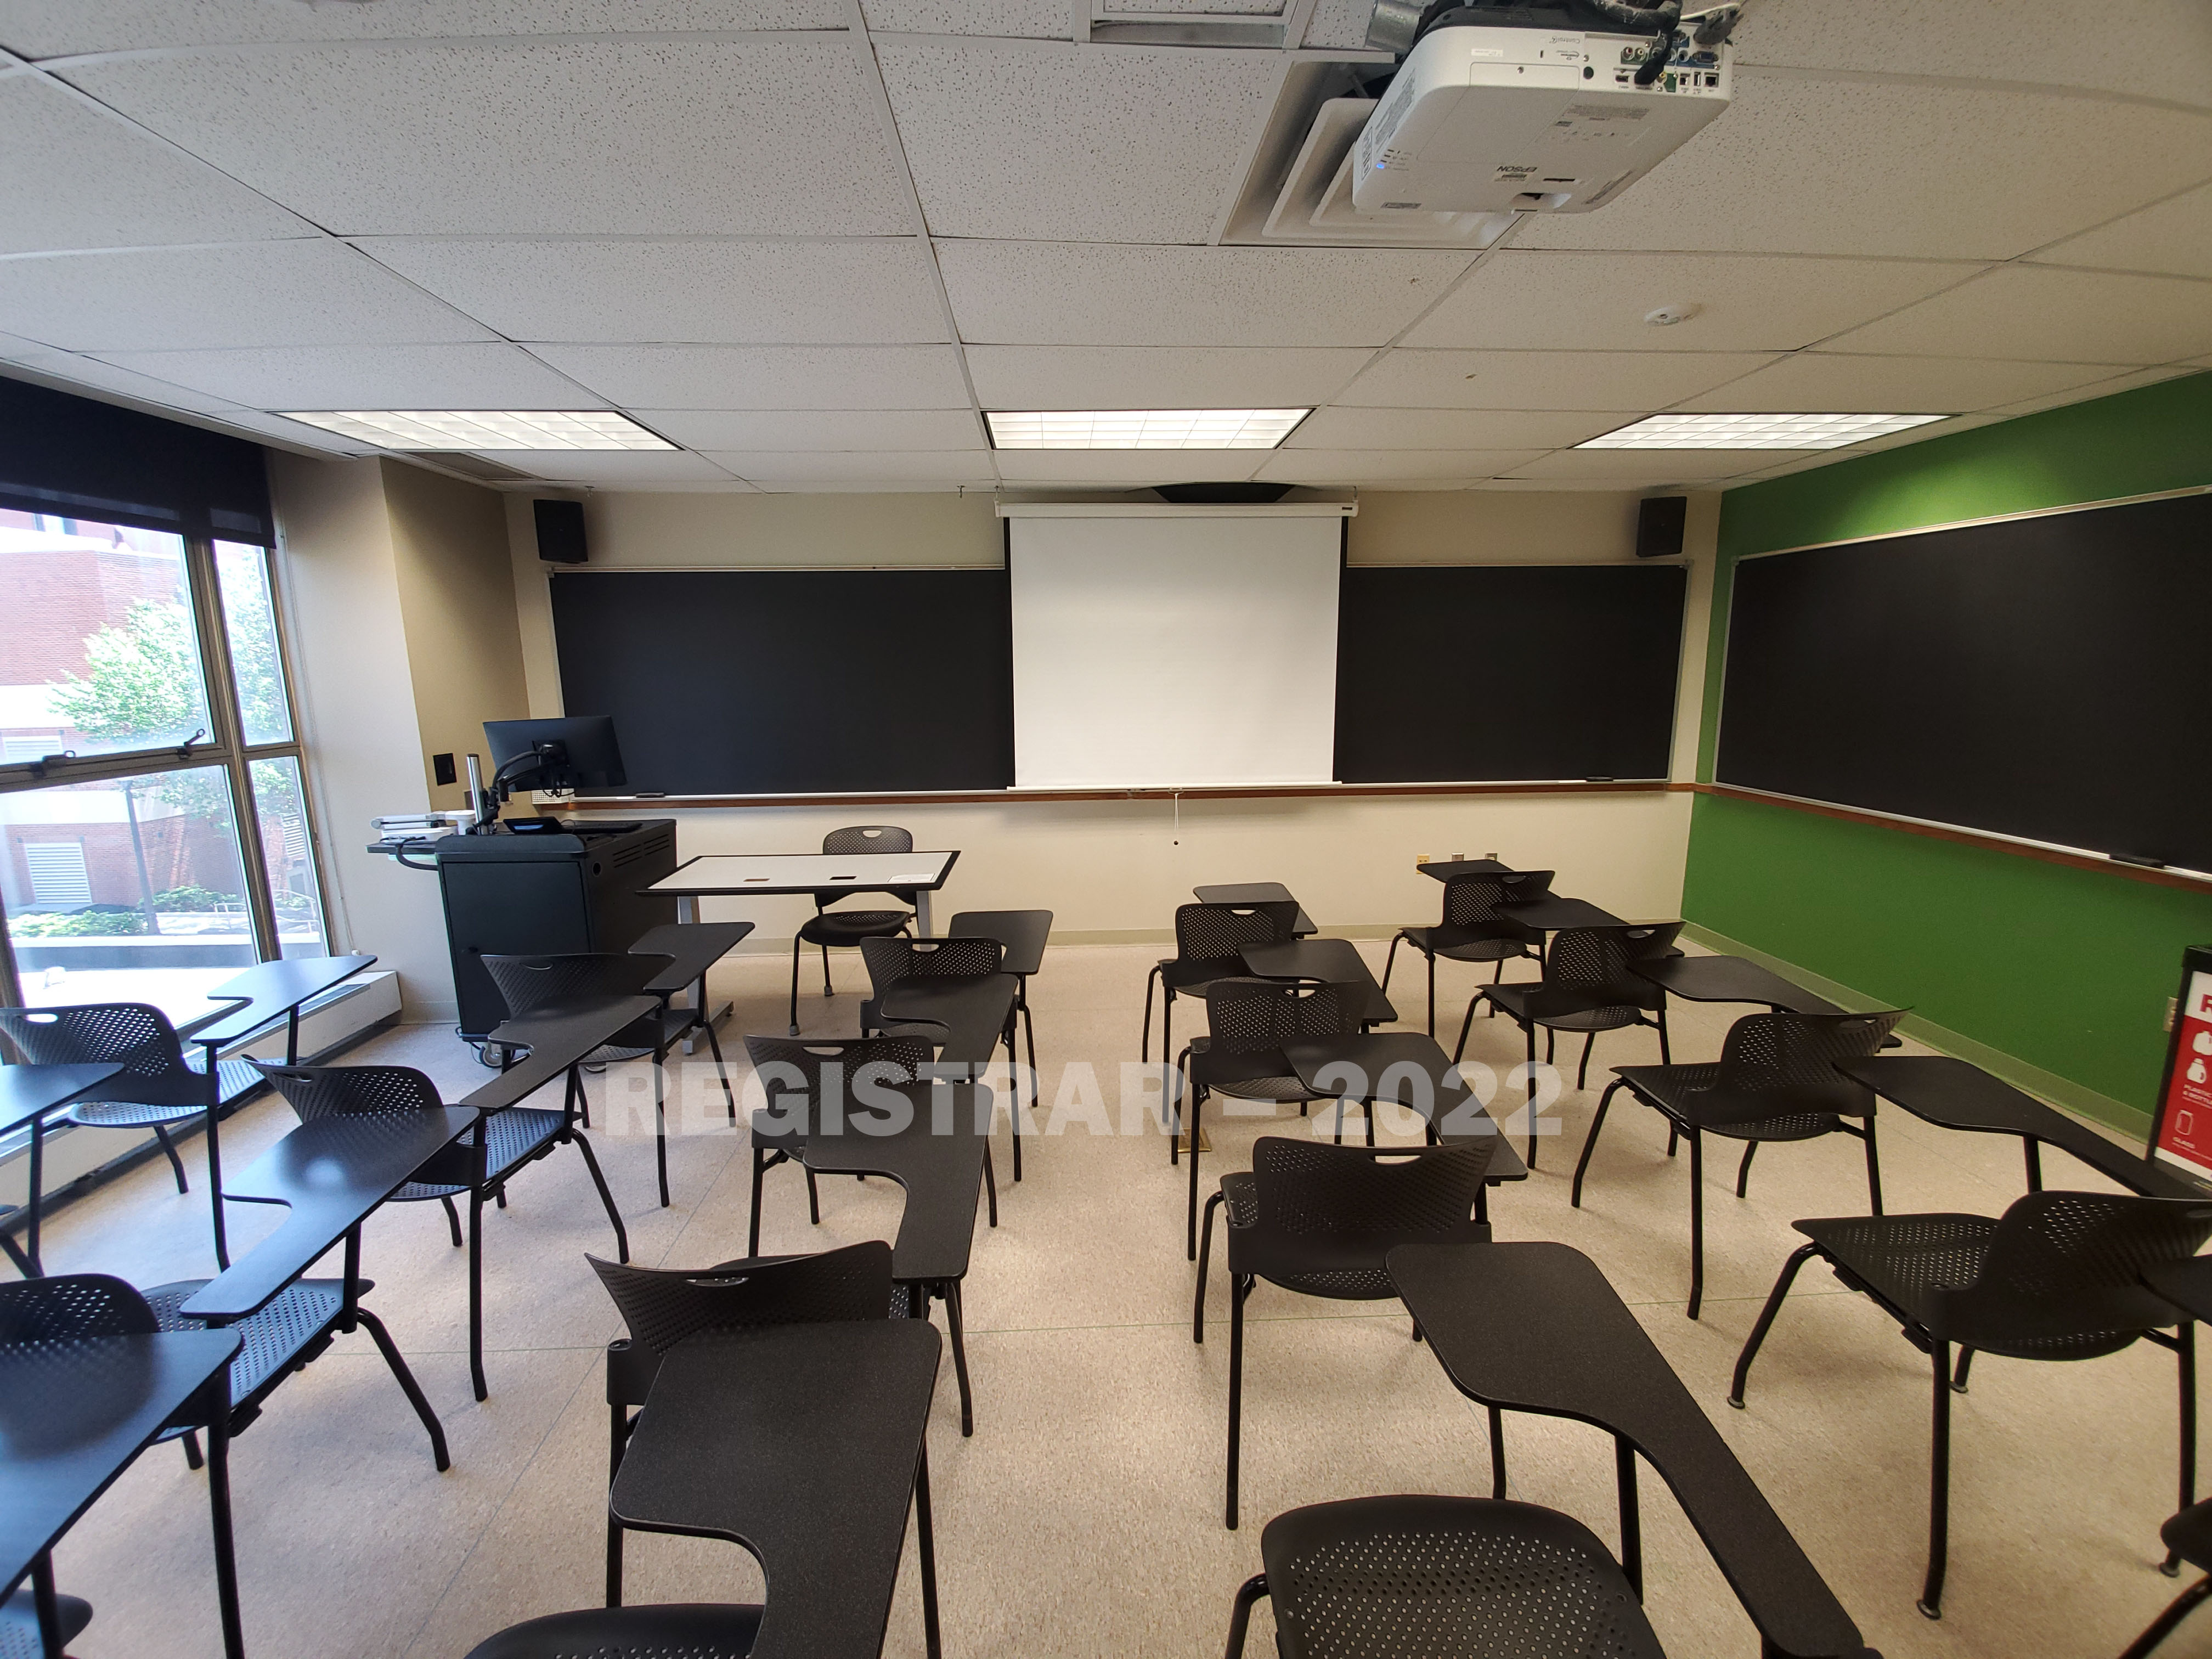 Enarson Classroom Building room 312 ultra wide angle view from the back of the room with projector screen down